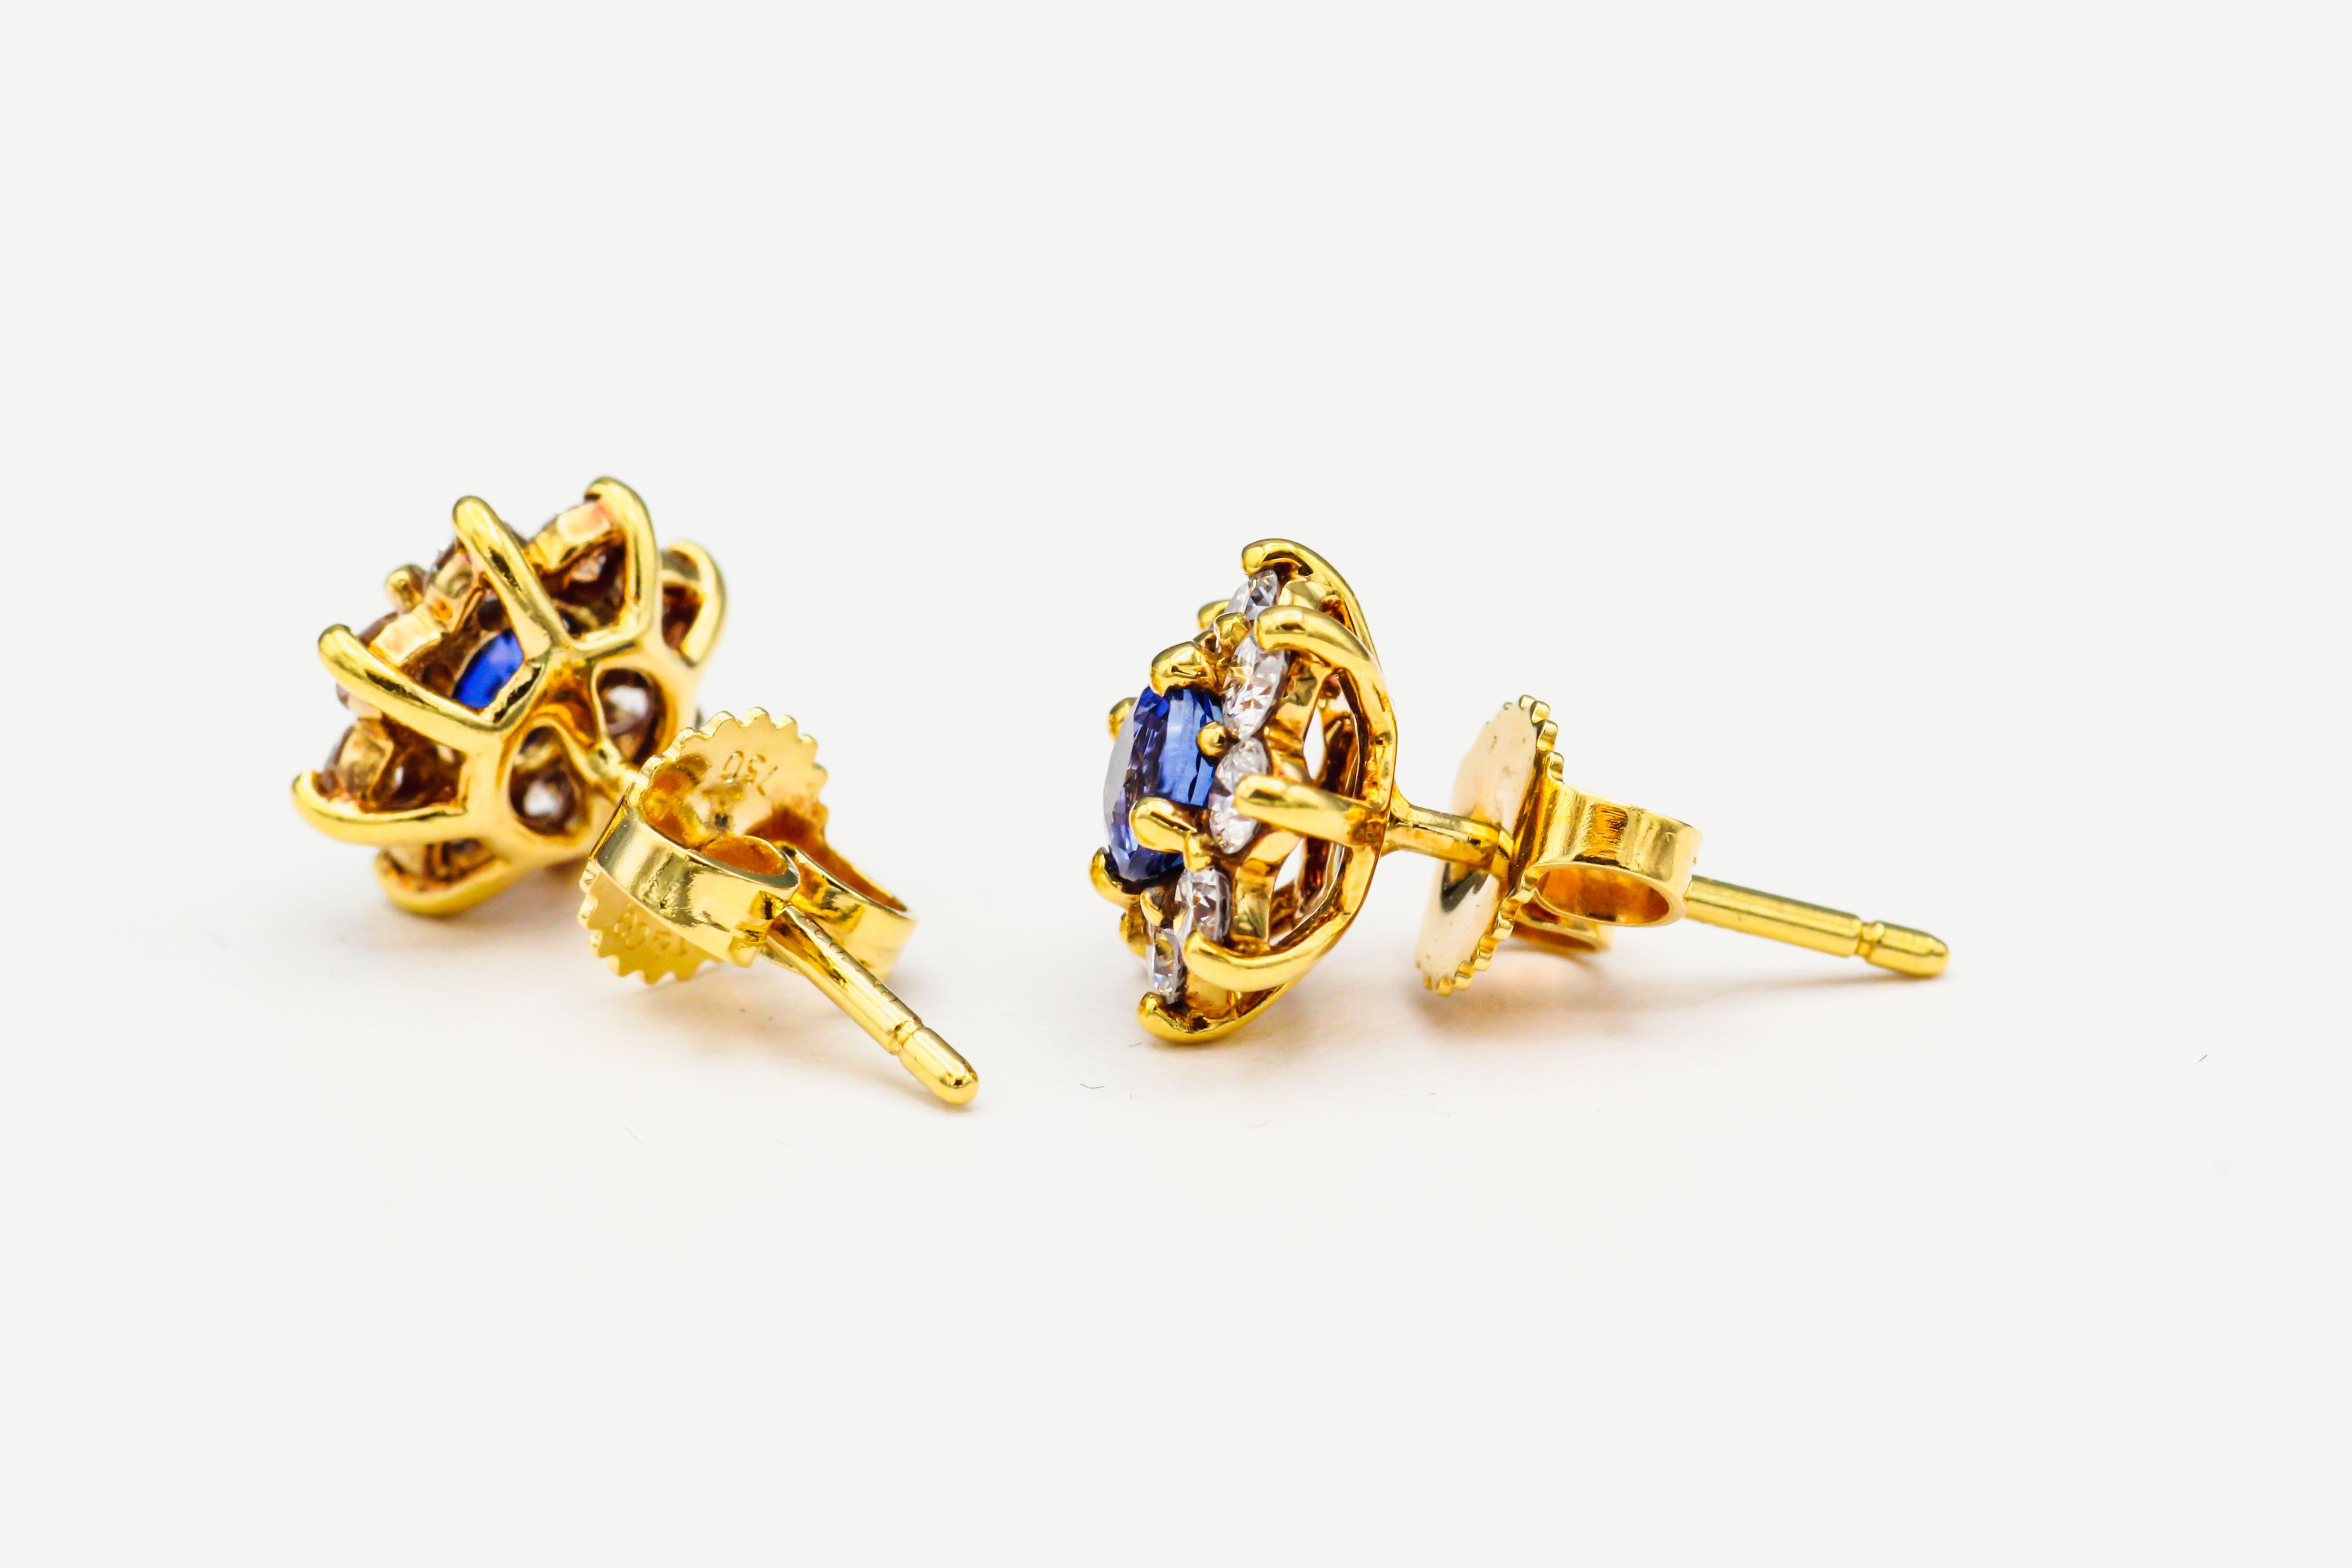 Fine pair of sapphire, diamond,  and 18K gold earrings, by Tiffany & Co. circa 1980s.  They features approx. 0.33 cts of high quality brilliant-cut diamonds and approx 0.7 cts of rich blue round cut sapphires. Very easy to wear and match for a